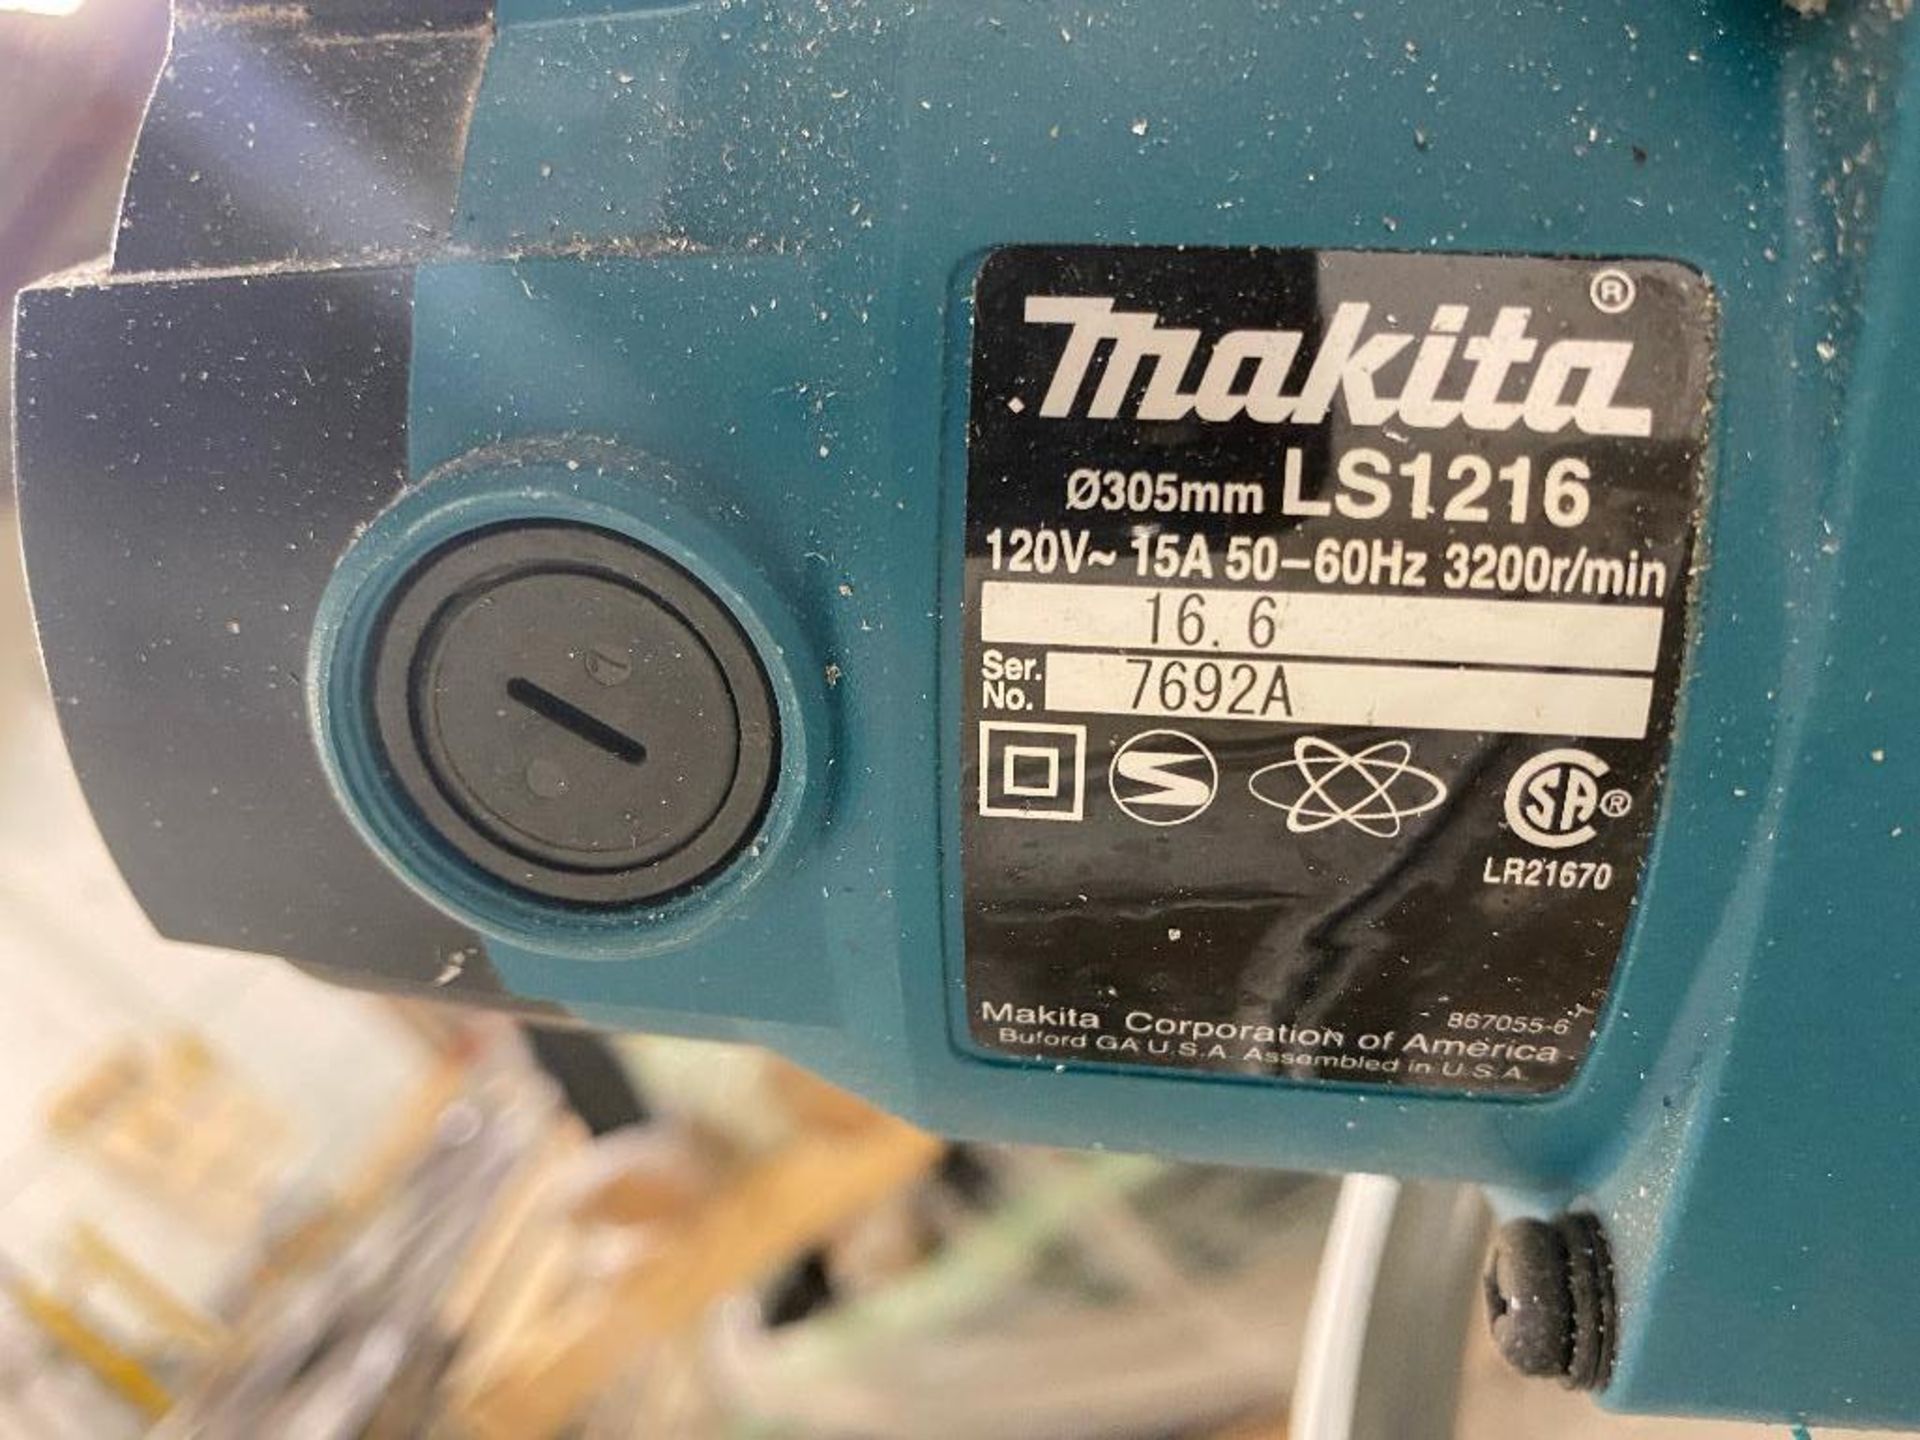 Makita LS1216 12-Inch Dual Sliding Compound Mitre Saw w/ Steel Stand - Image 5 of 5